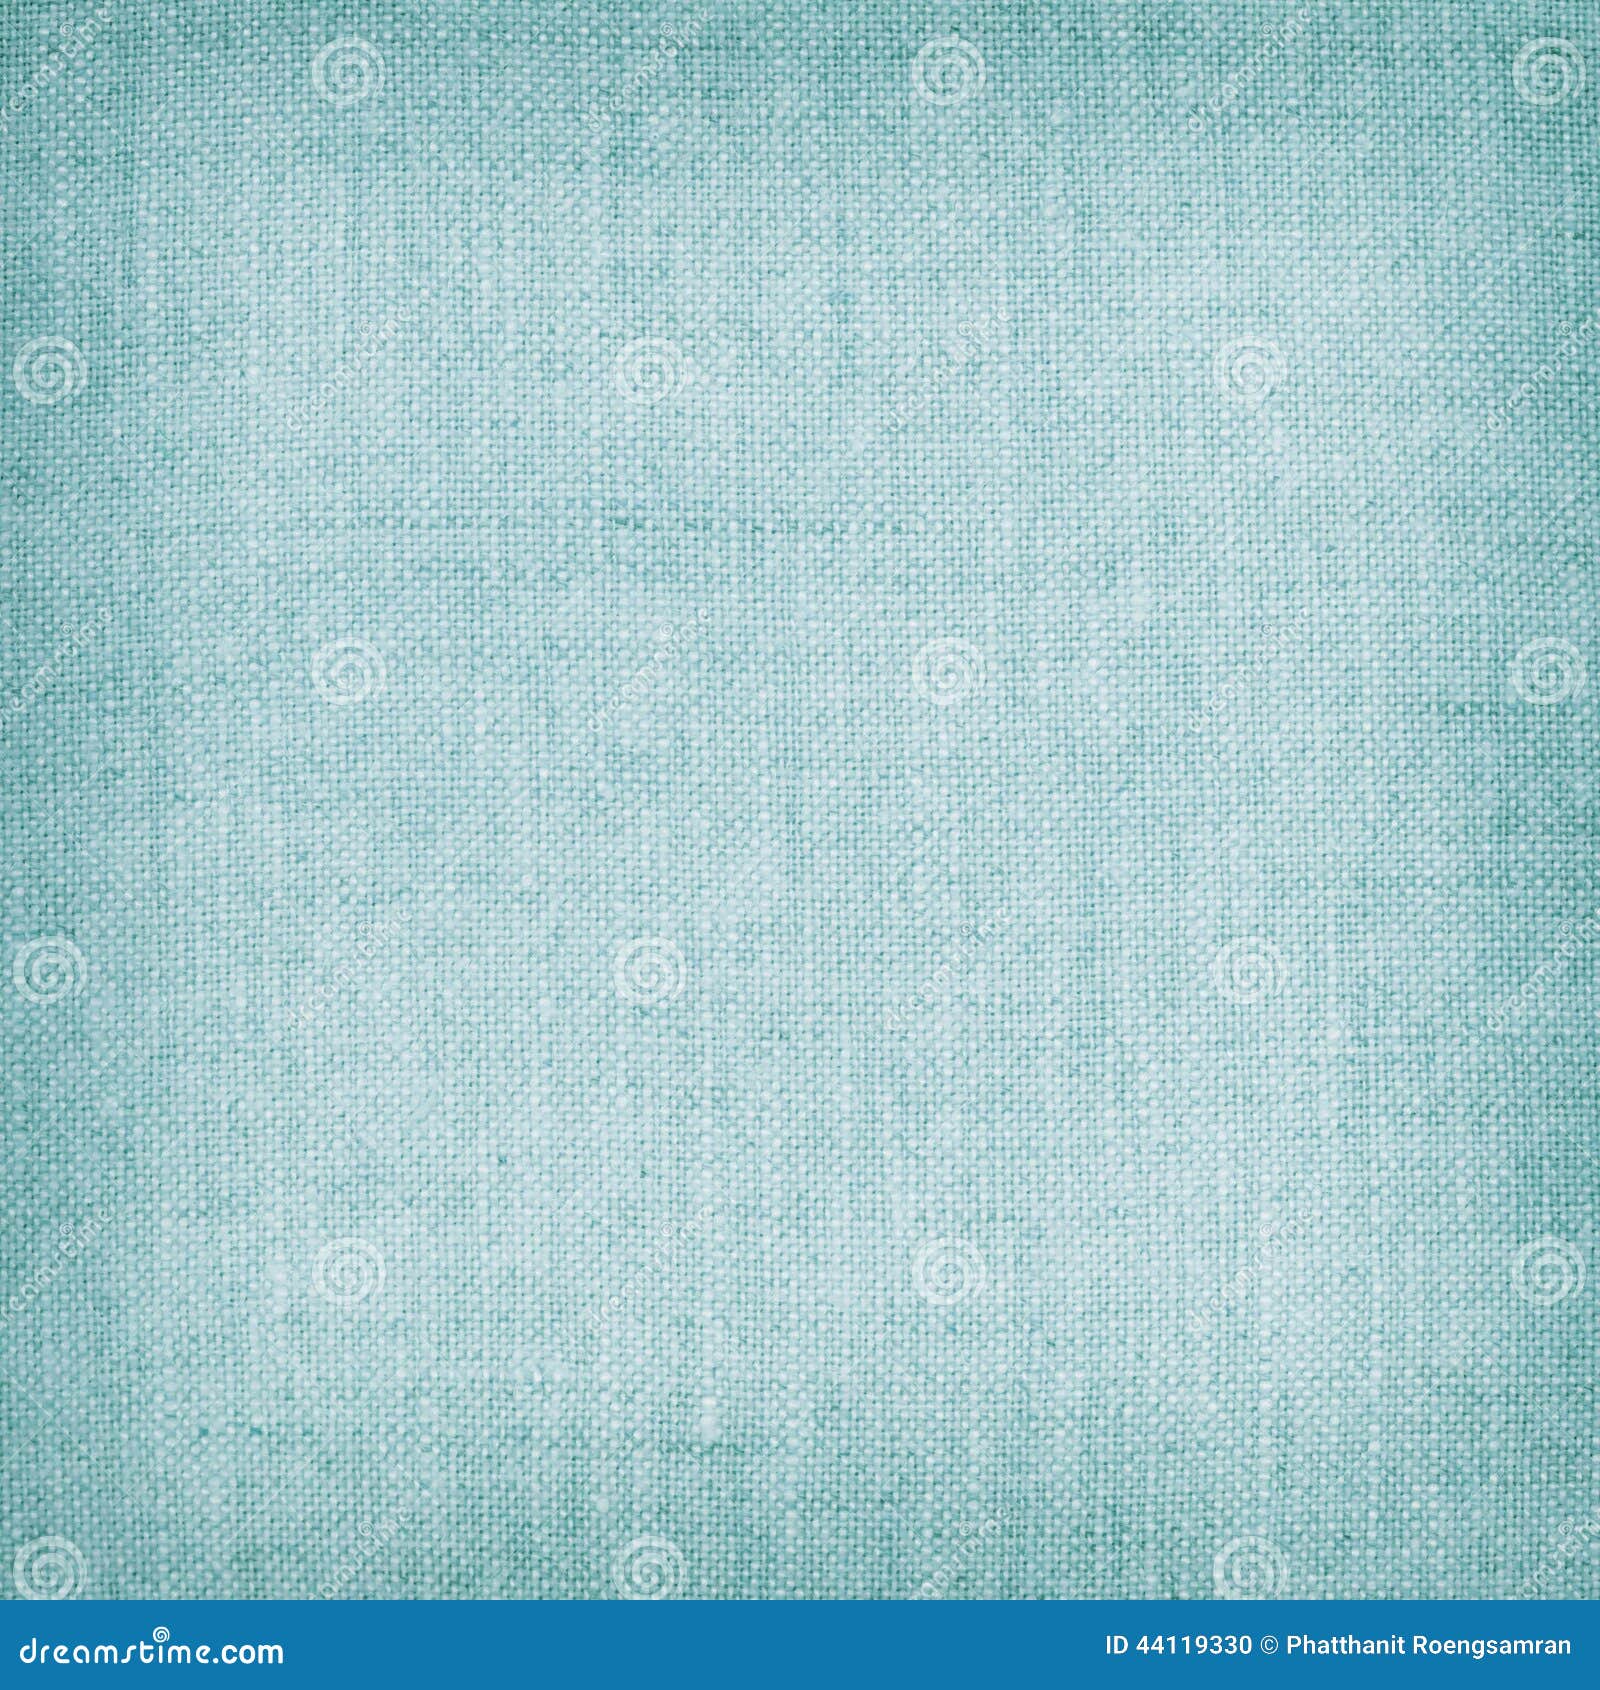 Blue Natural Linen Texture For The Background Stock Photo - Image of